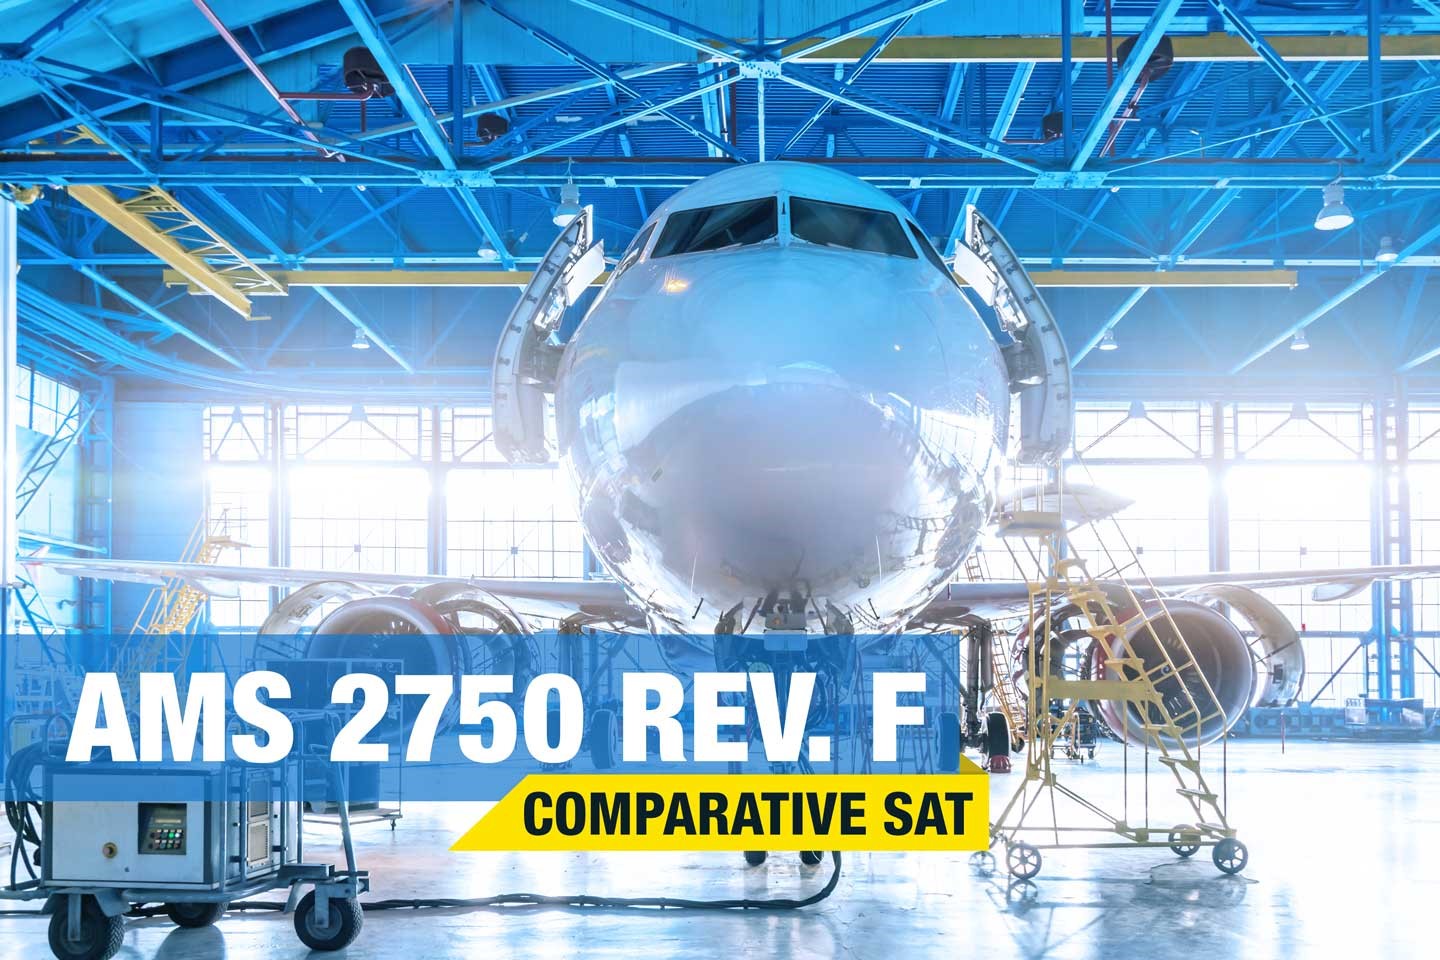 AMS 2750F pyrometric requirements for heat treatments: what’s the comparative SAT